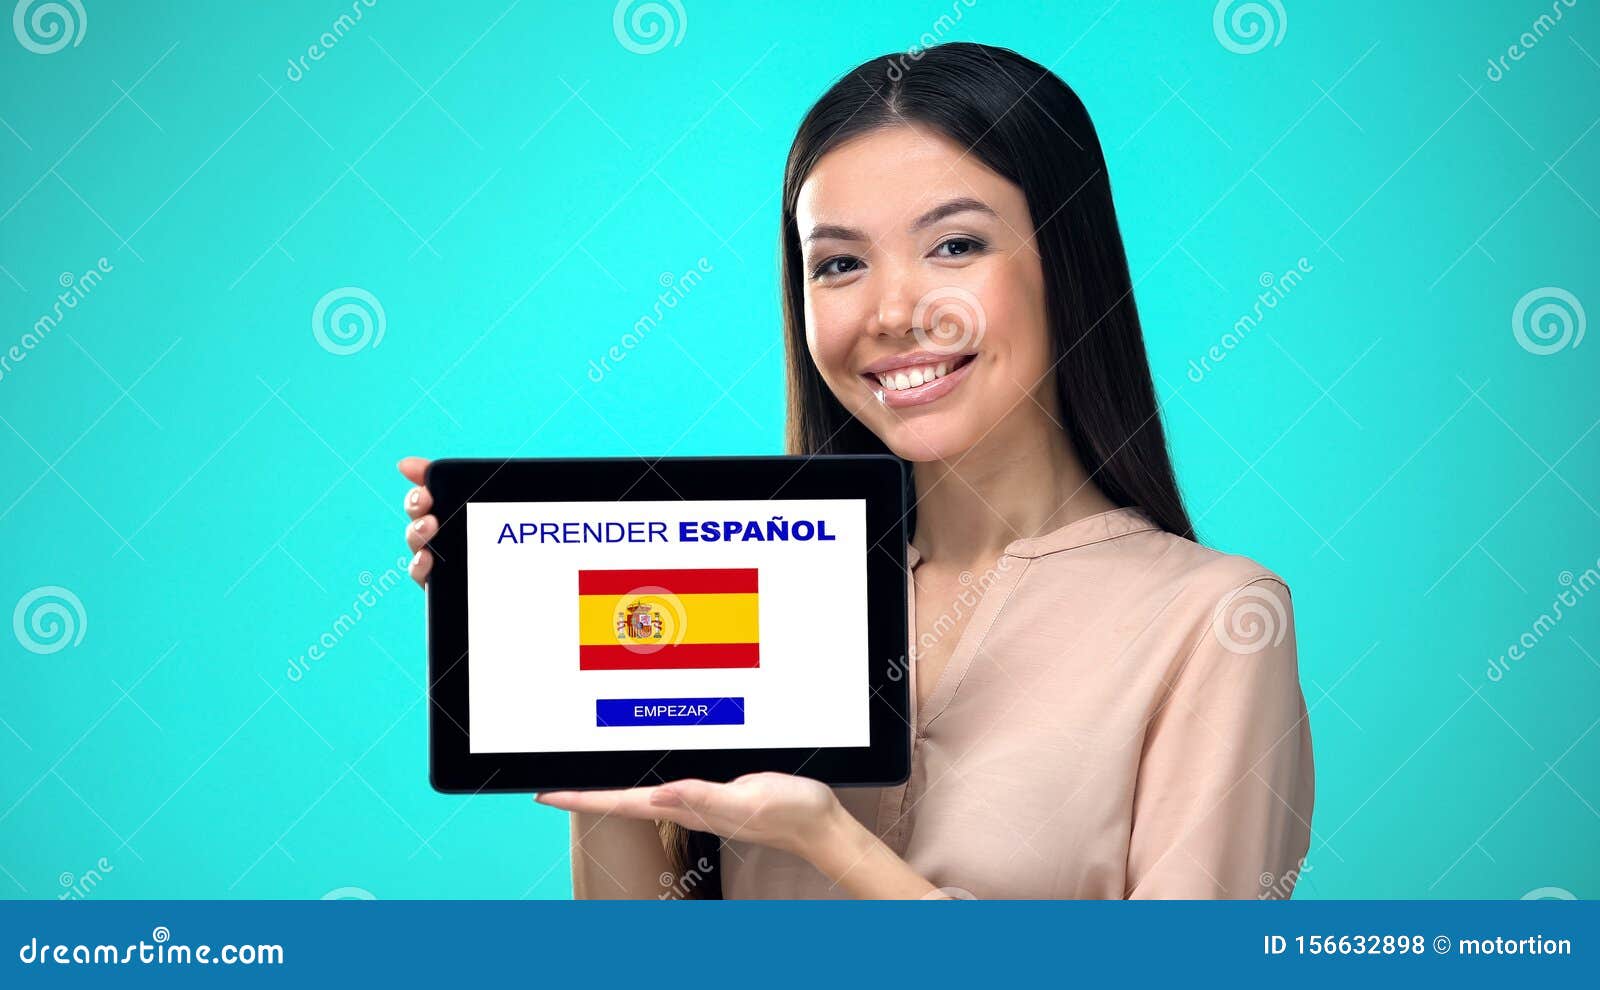 female holding tablet with learn spanish application, ready to start course